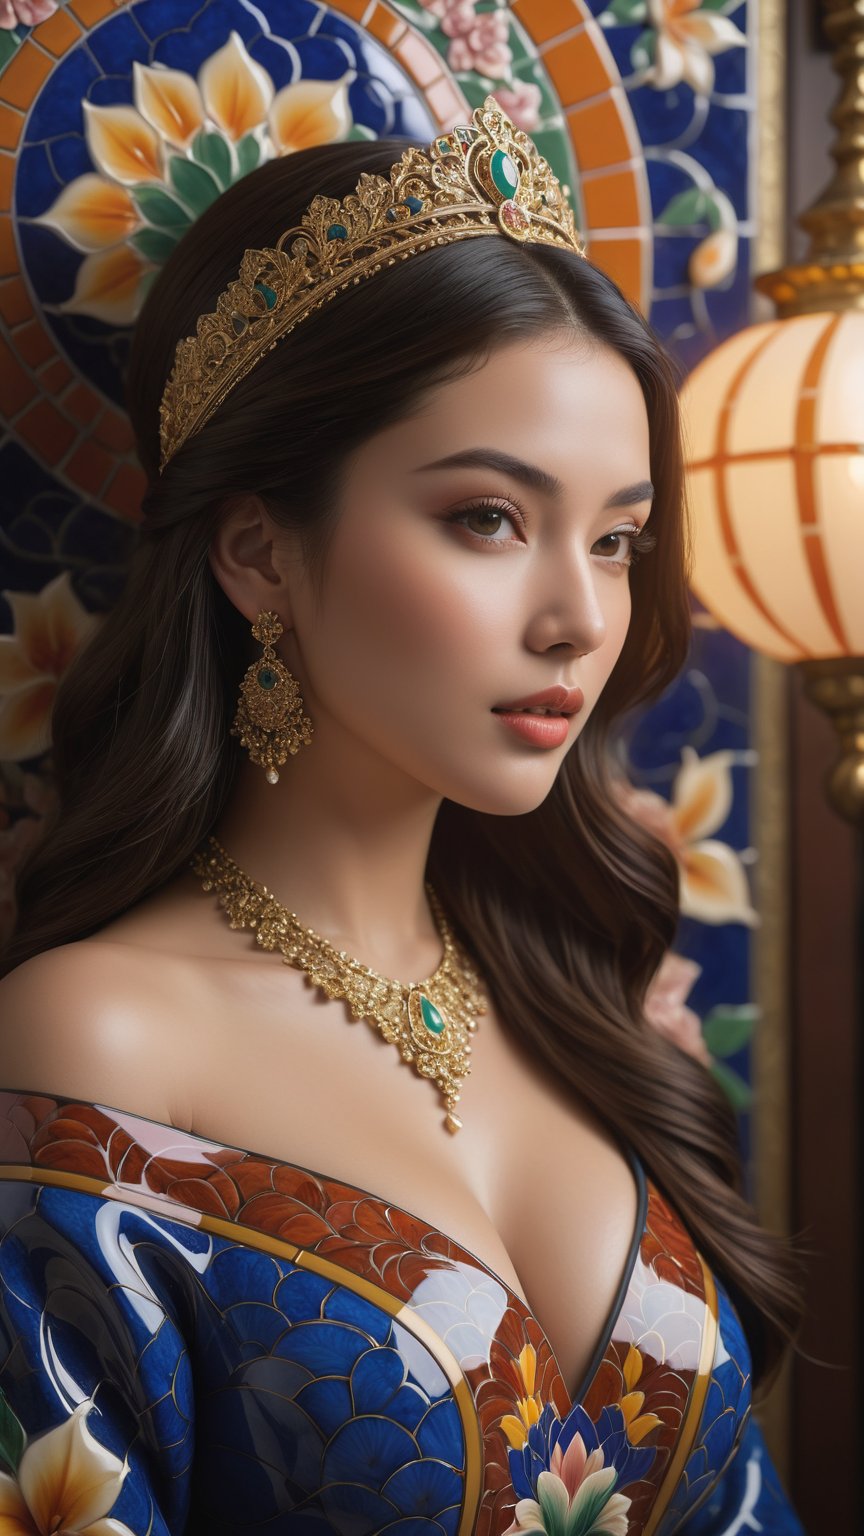 In a majestic, dark atmosphere, an exotic, voluptuous princess is depicted amidst intricate, elegant ceramic tile art featuring beautiful flowers. The smooth, sharp focus showcases the subject's refined features as she poses in front of a stunning, 8K ultra-detailed backdrop. Glowing effects enhance the ambiance, while vibrant colors pop against the rich, atmospheric background. With a deep depth of field and cinematic sensuality, this humorous illustration is a Masterpiece of concept art, blending hyperrealistic details with modelshoot style flair.